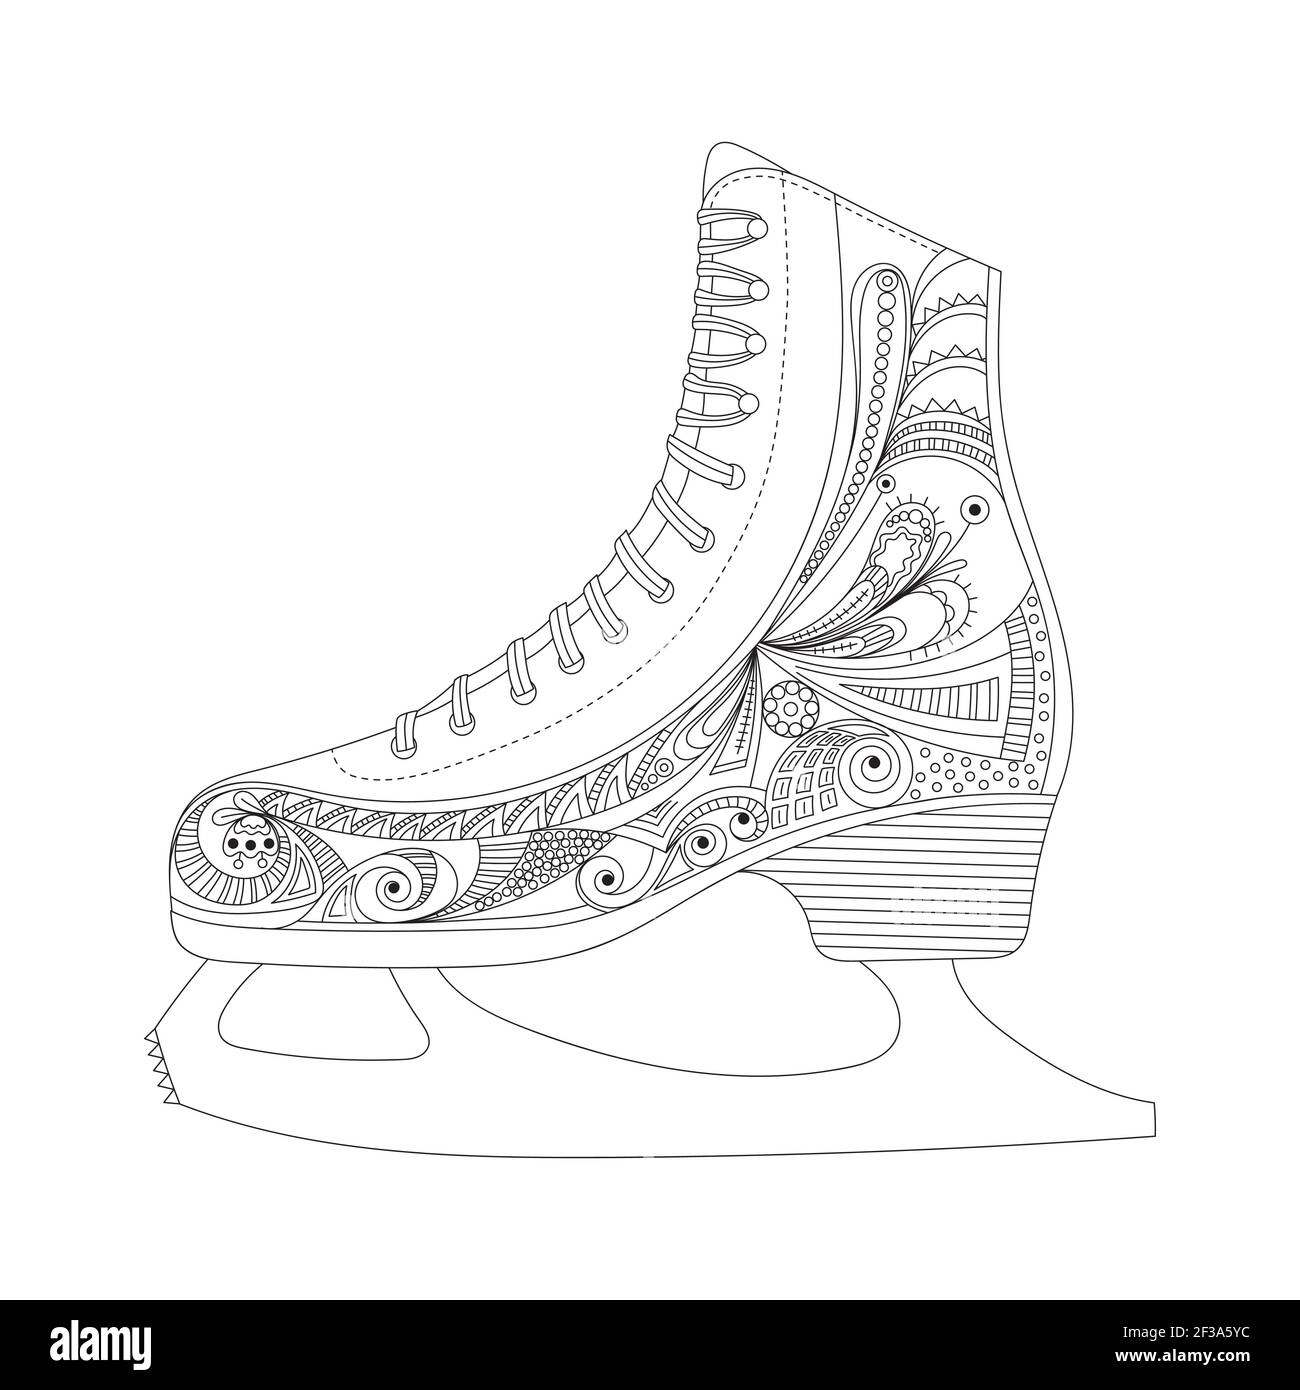 figure skating skate, vector illustration for coloring pages. black and white on a white background. Stock Vector